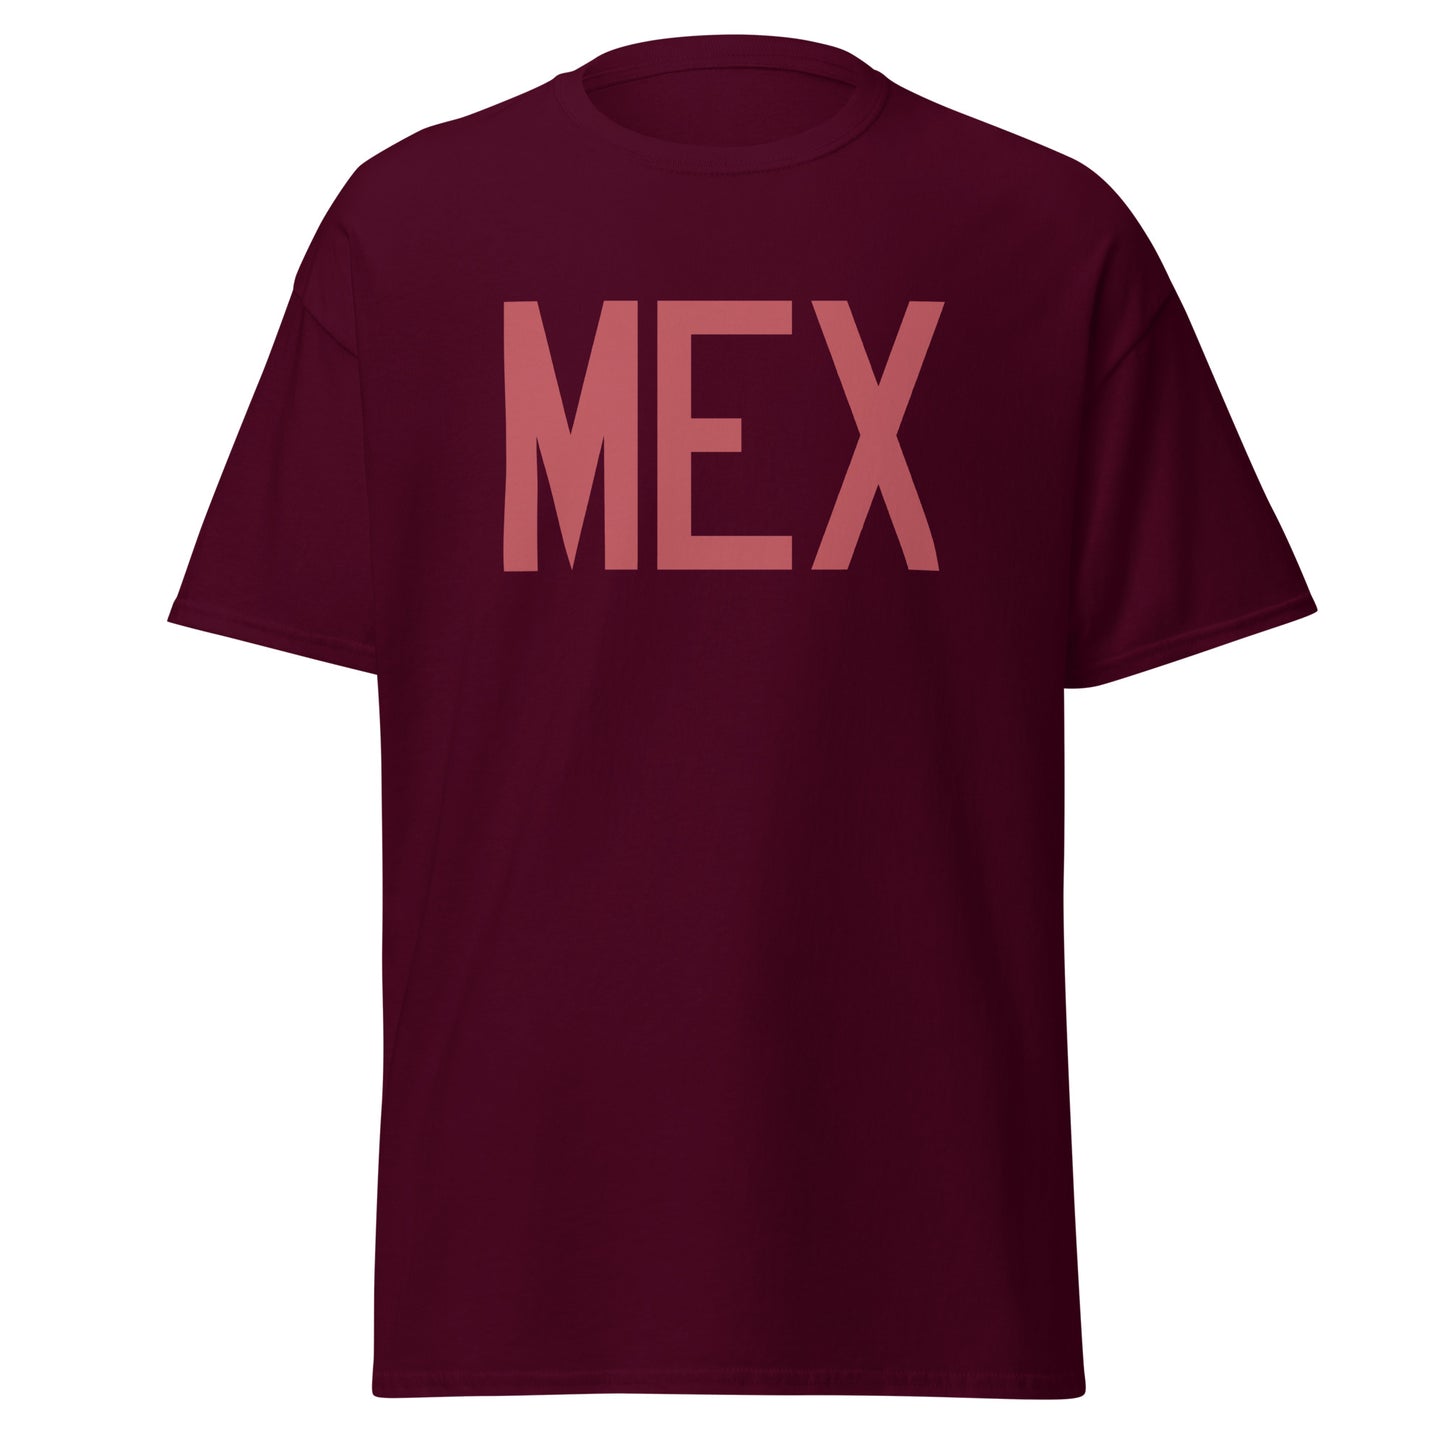 Aviation Enthusiast Men's Tee - Deep Pink Graphic • MEX Mexico City • YHM Designs - Image 05